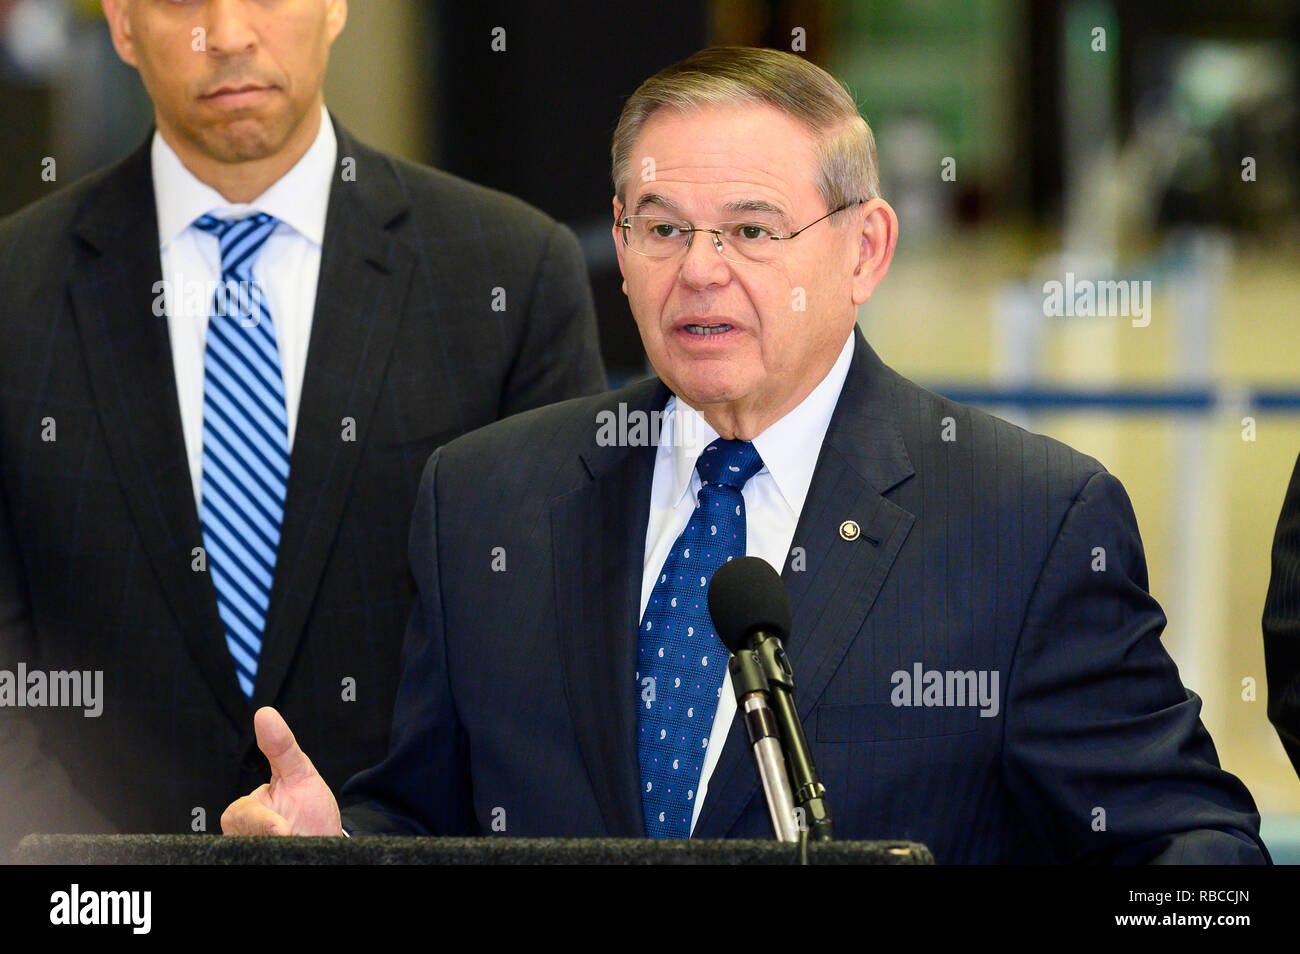 U.S. Senator Bob Menendez (D-NJ) seen speaking at a news conference at Newark Liberty International Airport to demand an end to the partial government shutdown leaving thousands of federal workers in New Jersey without pay and to highlight the impacts of lost services being felt statewide. At Newark Liberty International Airport in Newark, New Jersey. Stock Photo